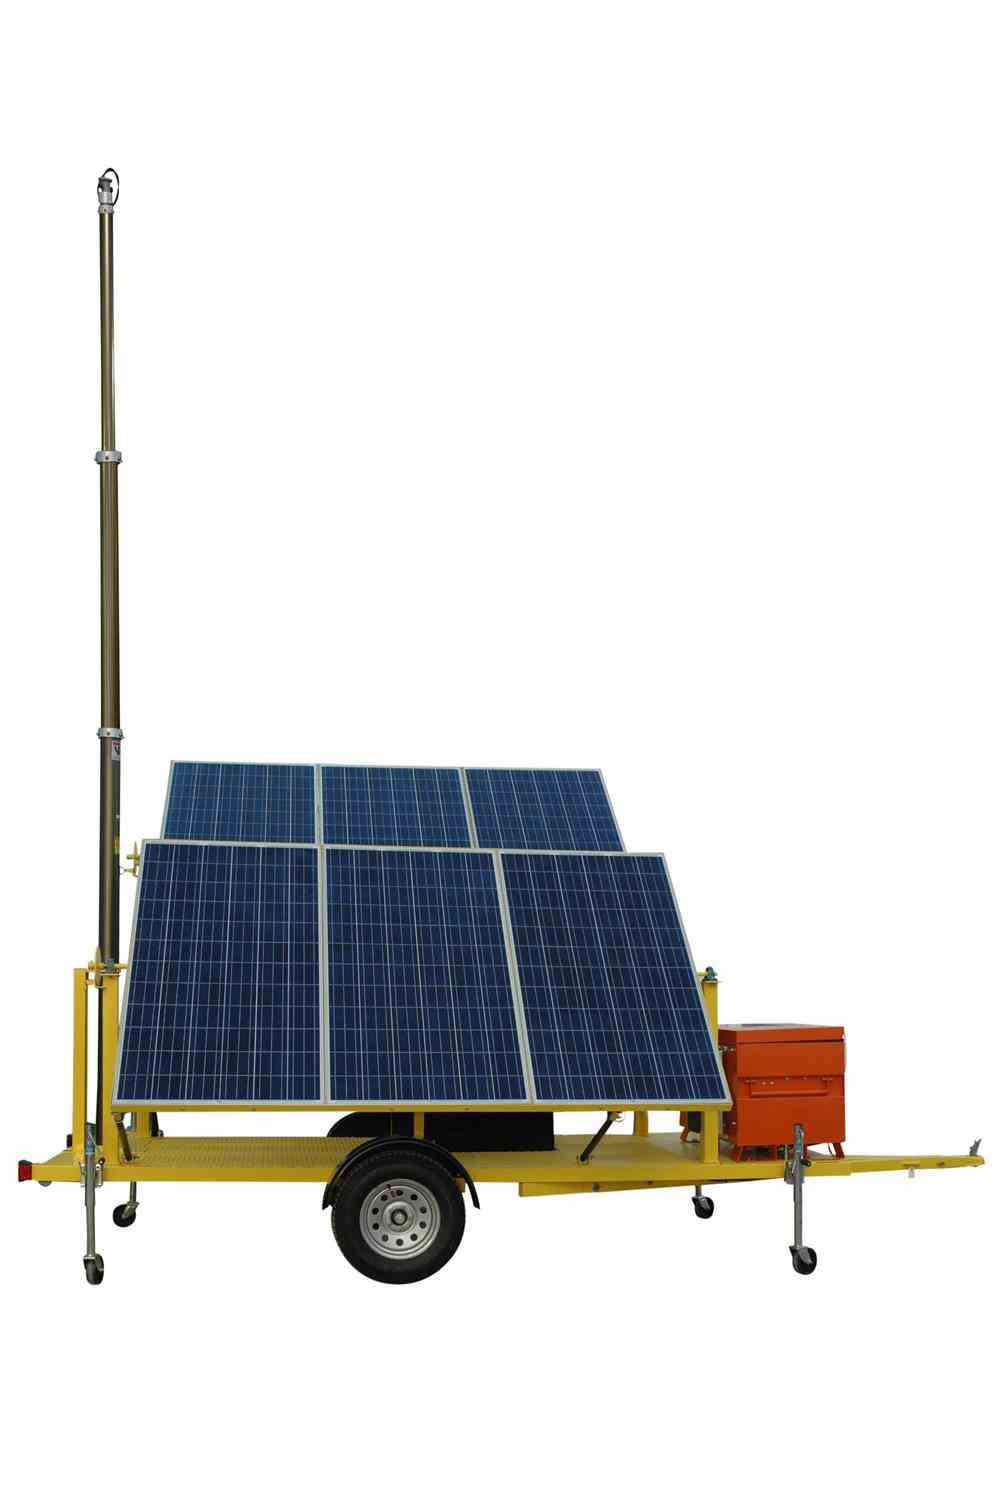 30' Trailer-Mounted, Solar-Powered Generator Features Pneumatic Tower Mast